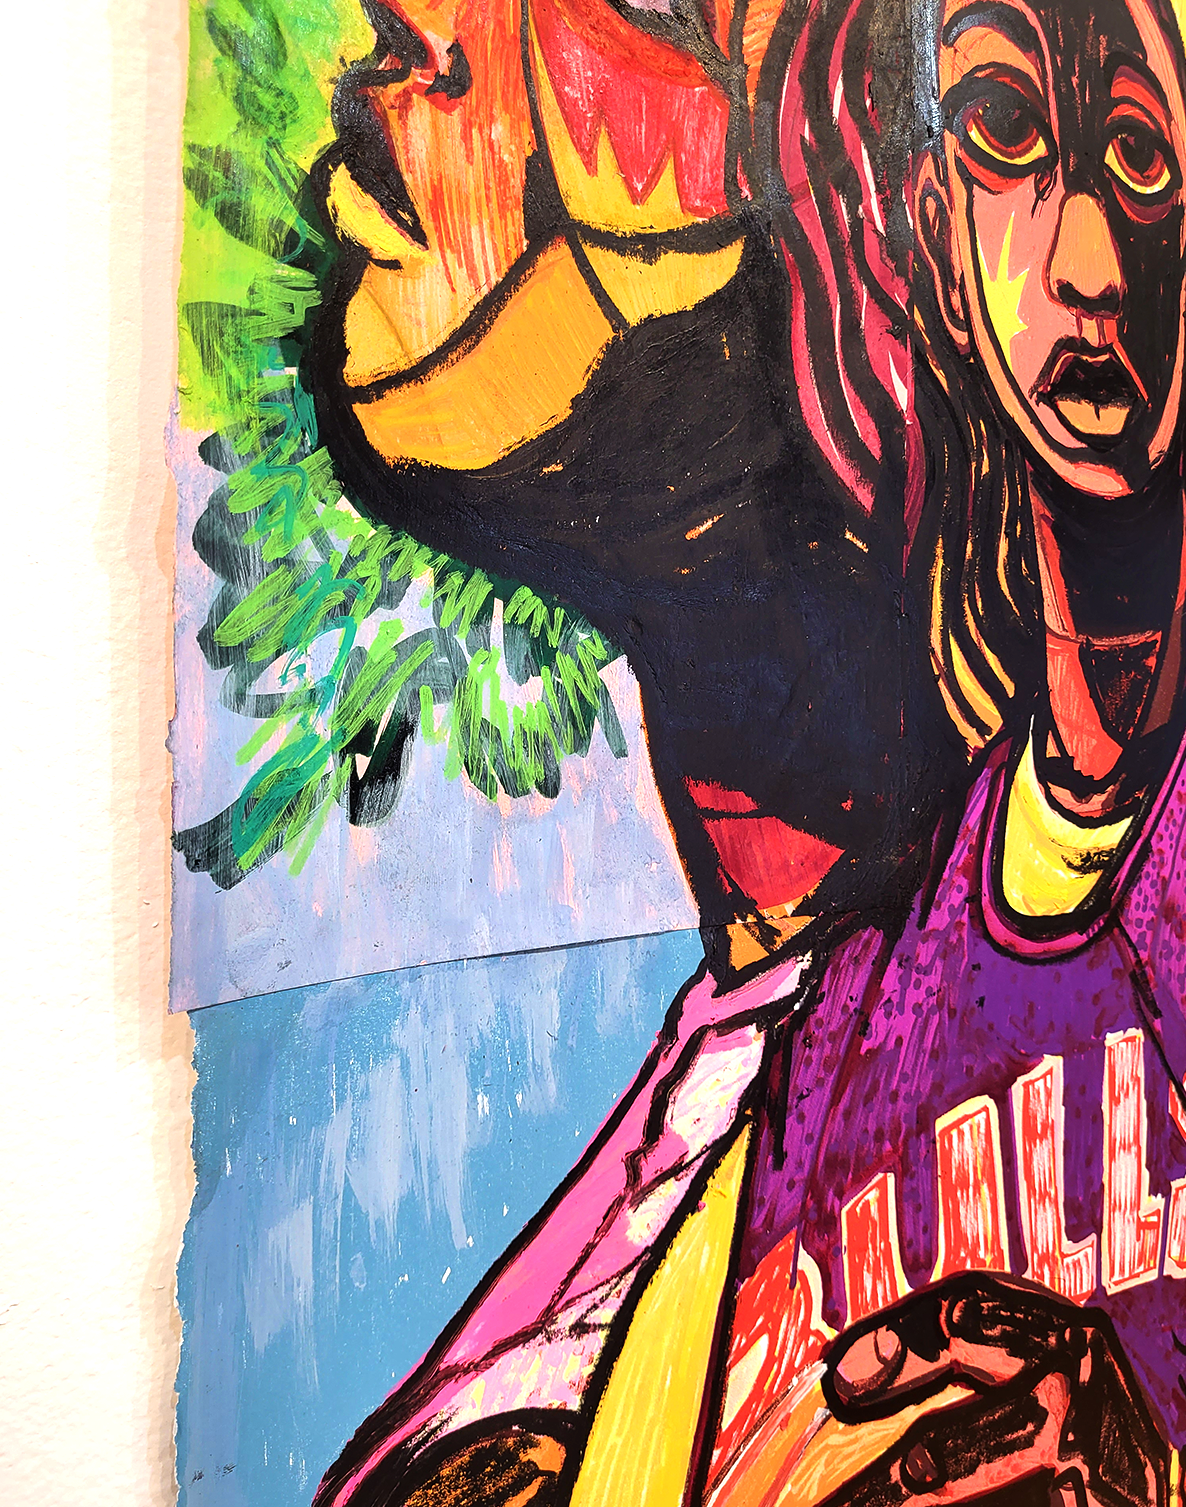 "Love and Basketball" Hand Embellished Variant #1 by Langston Allston